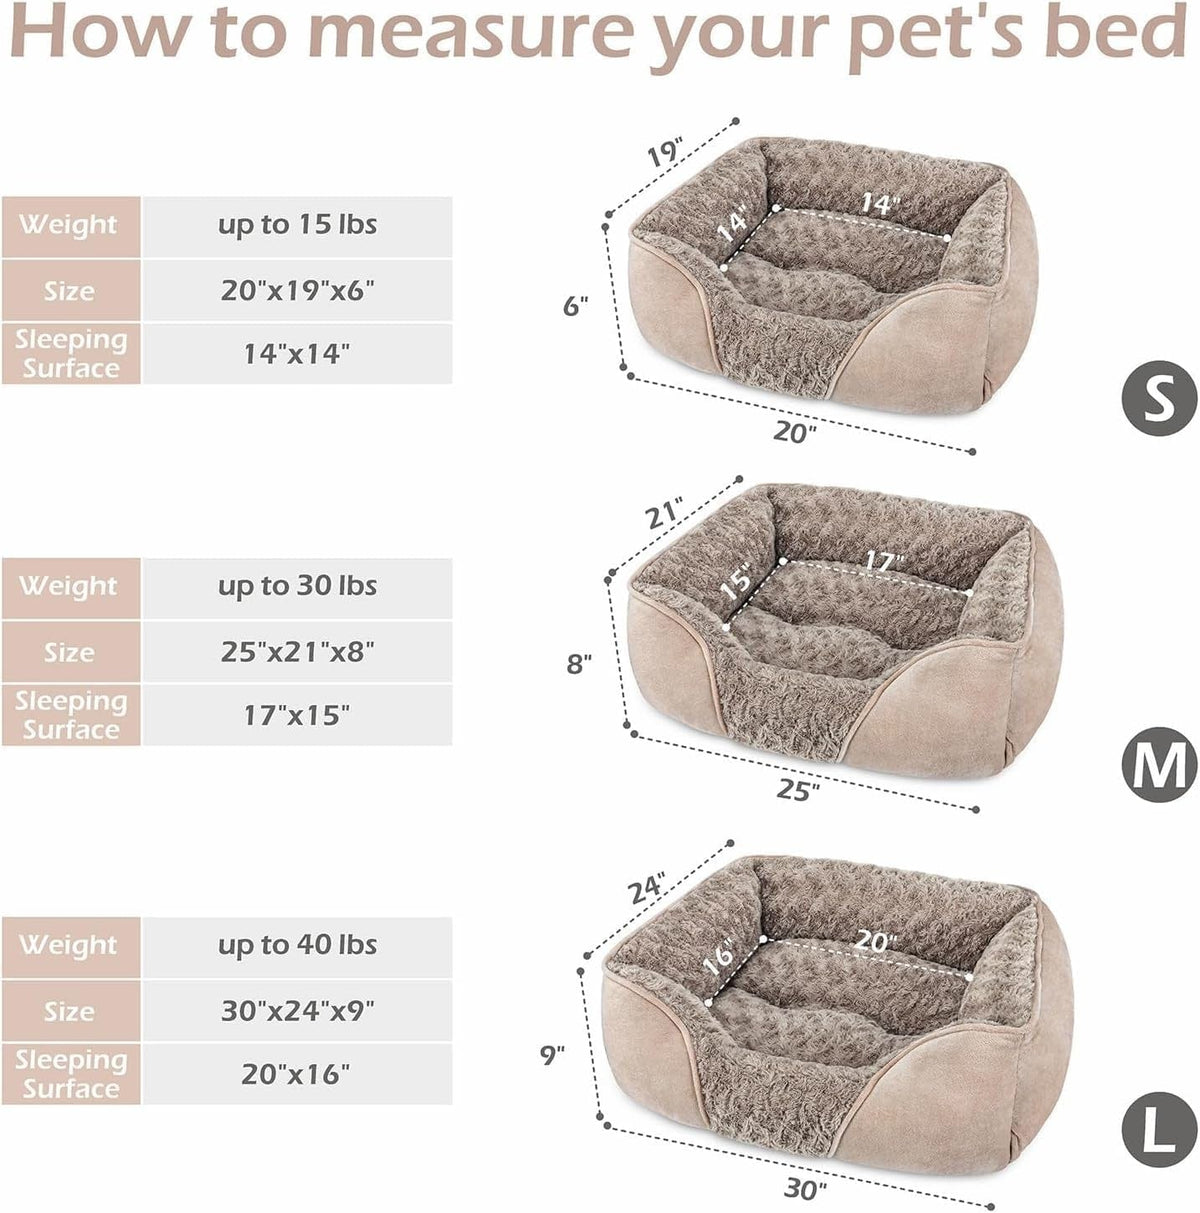 INVENHO Large Dog Bed for Large Medium Small Dogs Rectangle Washable Dog Bed, Orthopedic Dog Bed, Soft Calming Sleeping Puppy Bed Durable Pet Cuddler with Anti-Slip Bottom L(30"X24"X9")